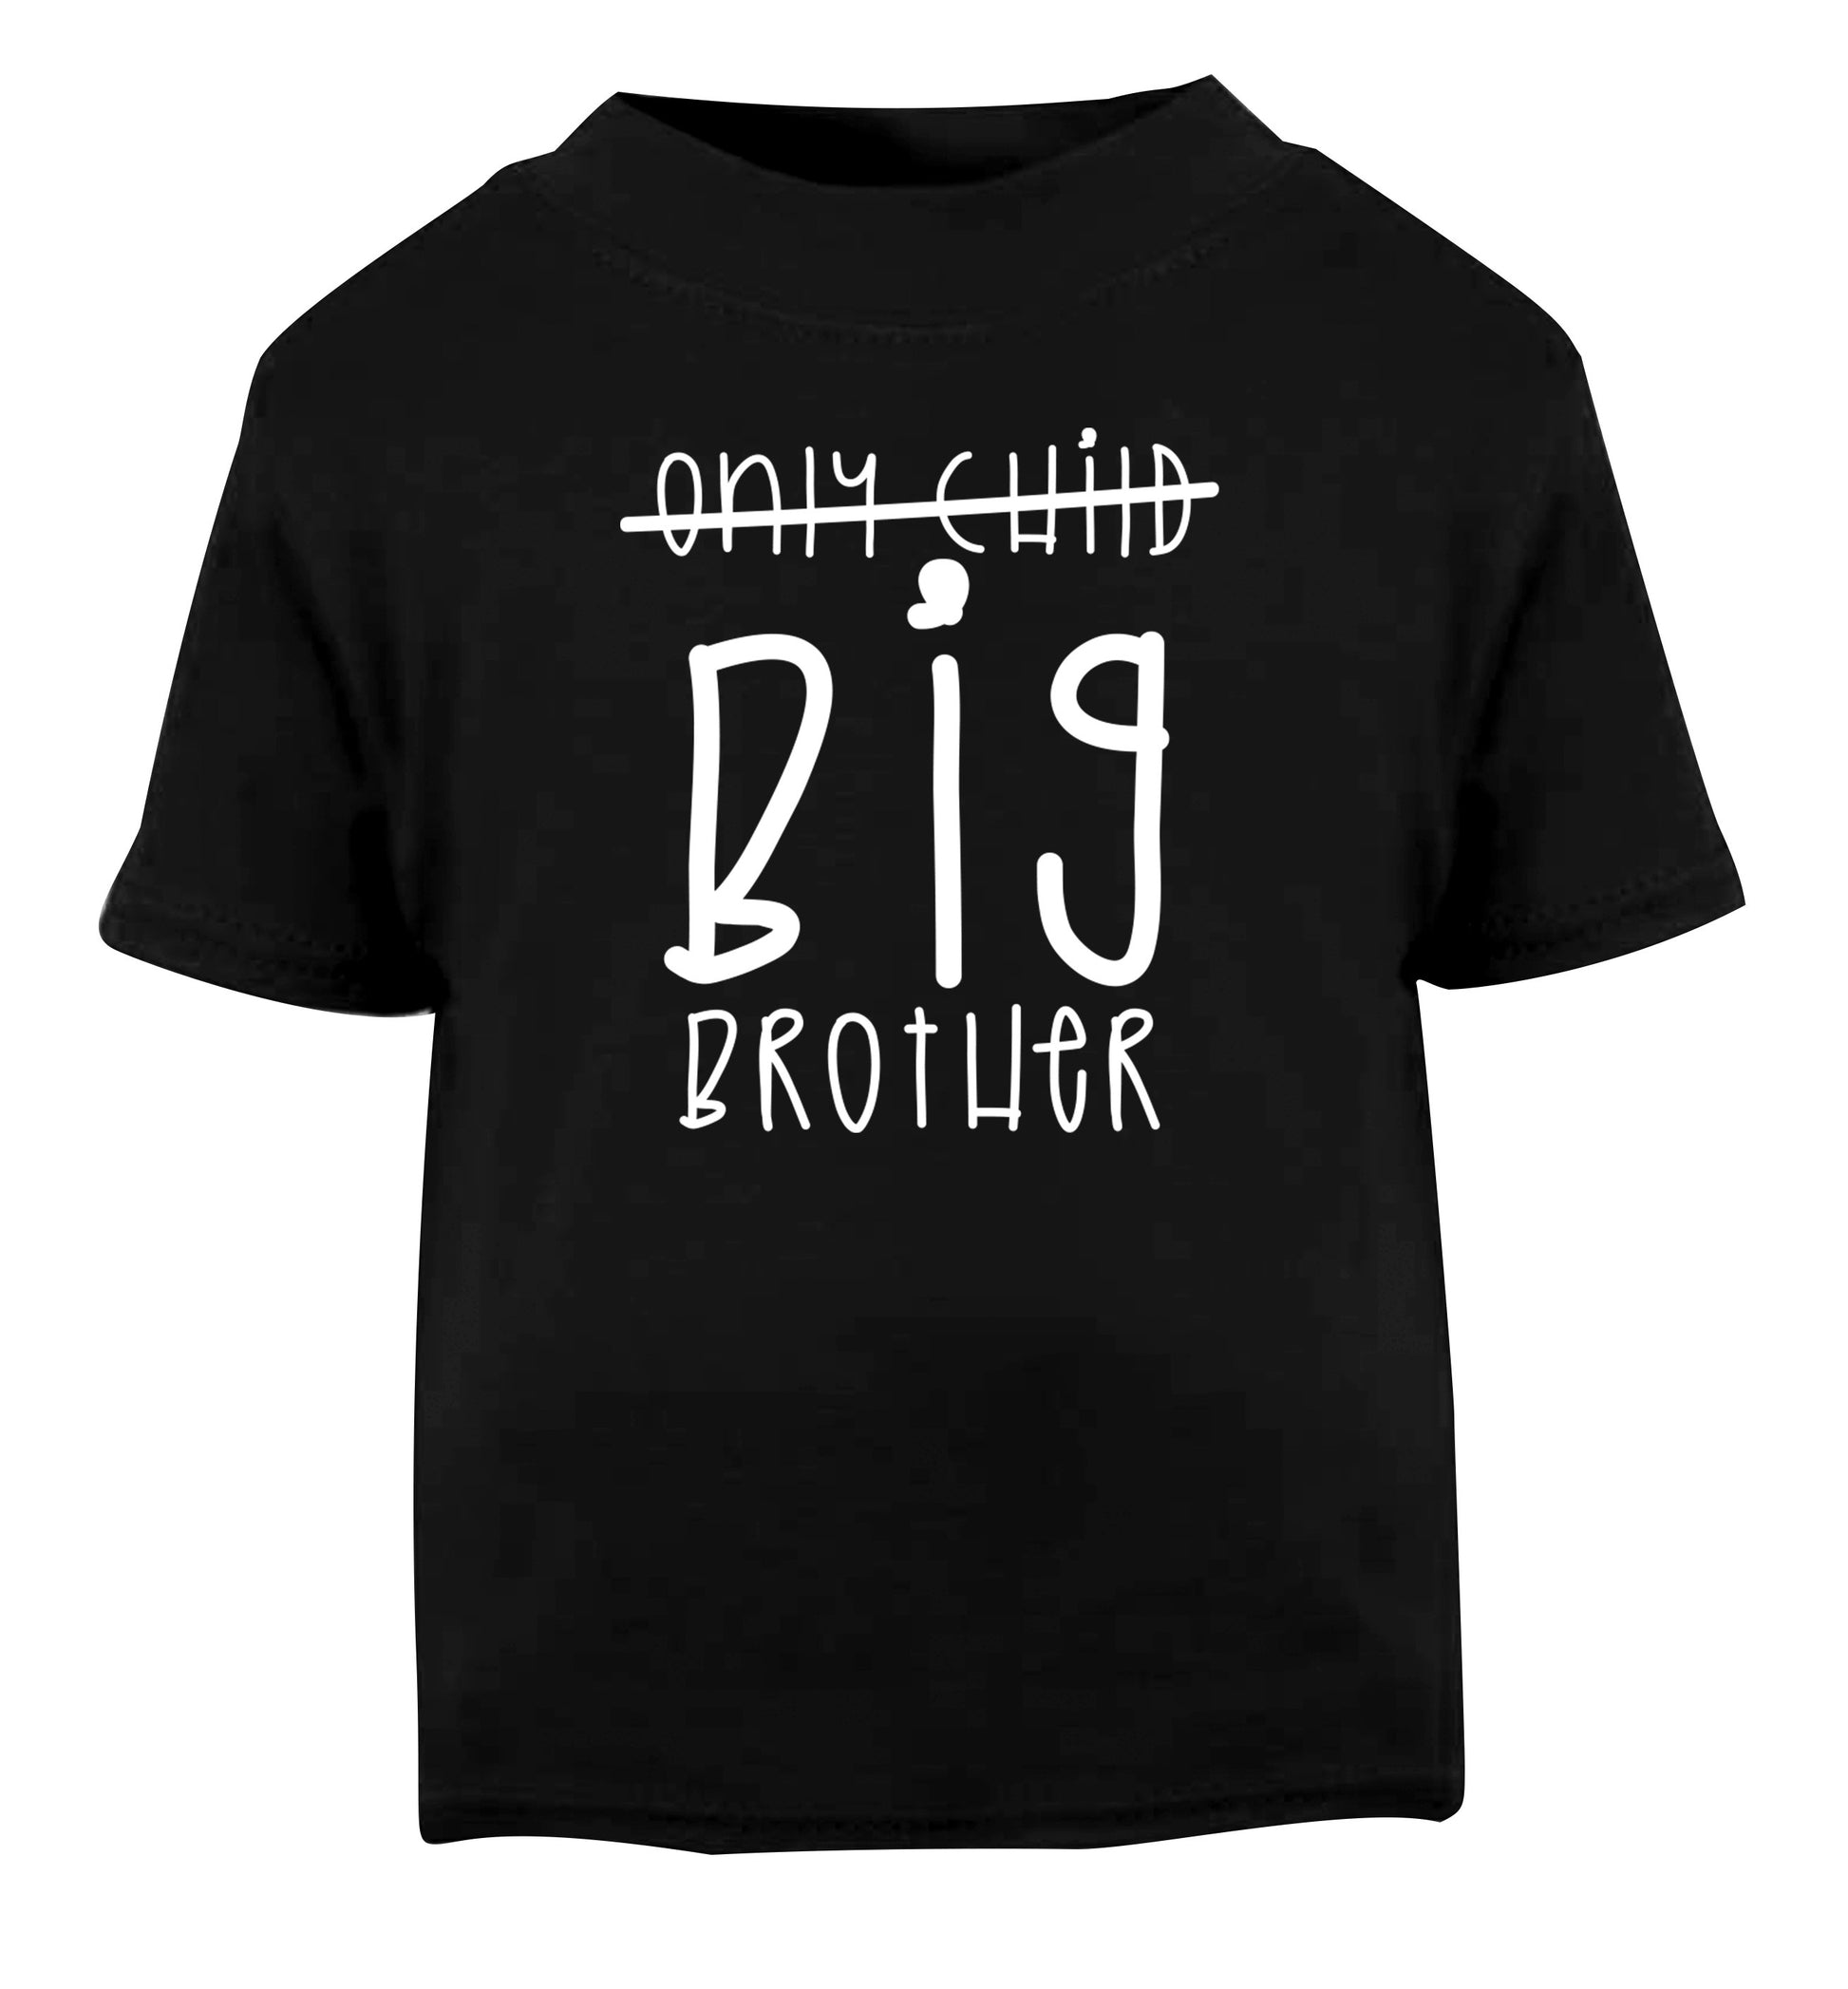 Only child big brother Black Baby Toddler Tshirt 2 years